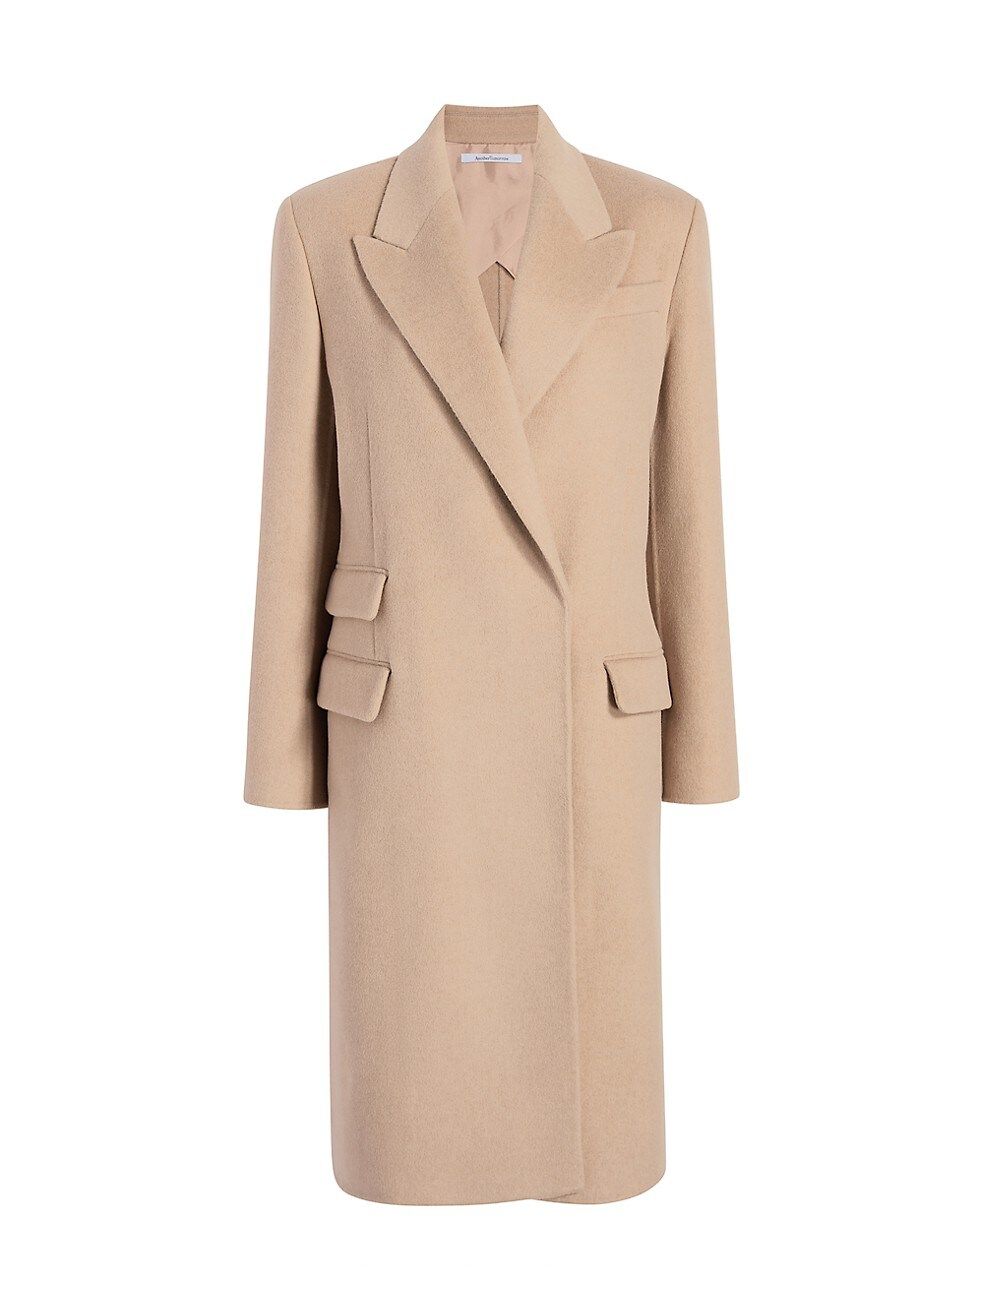 Another Tomorrow Double-Faced Wool Tailored Coat | Saks Fifth Avenue